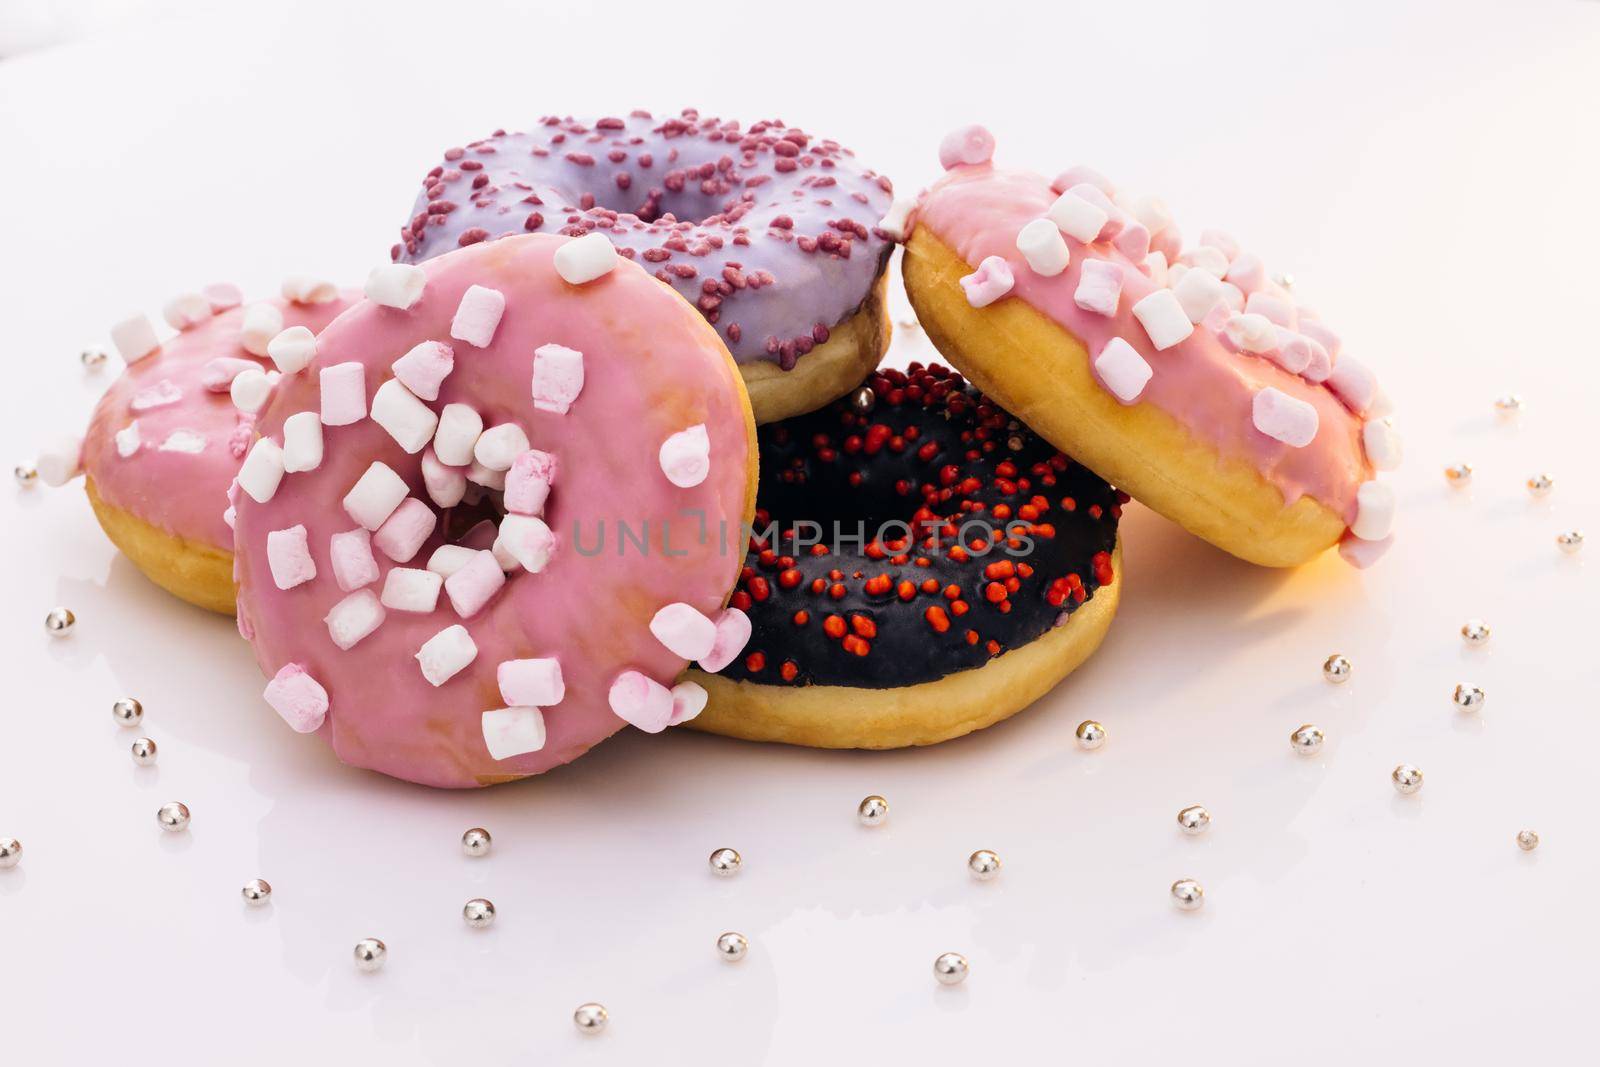 Donuts of white background. concept art. Donuts of different colors. Glazed sweet desserts. Fast food, Bakery concept. Various colorful donuts. Chocolate, purple, pink donuts. by uflypro